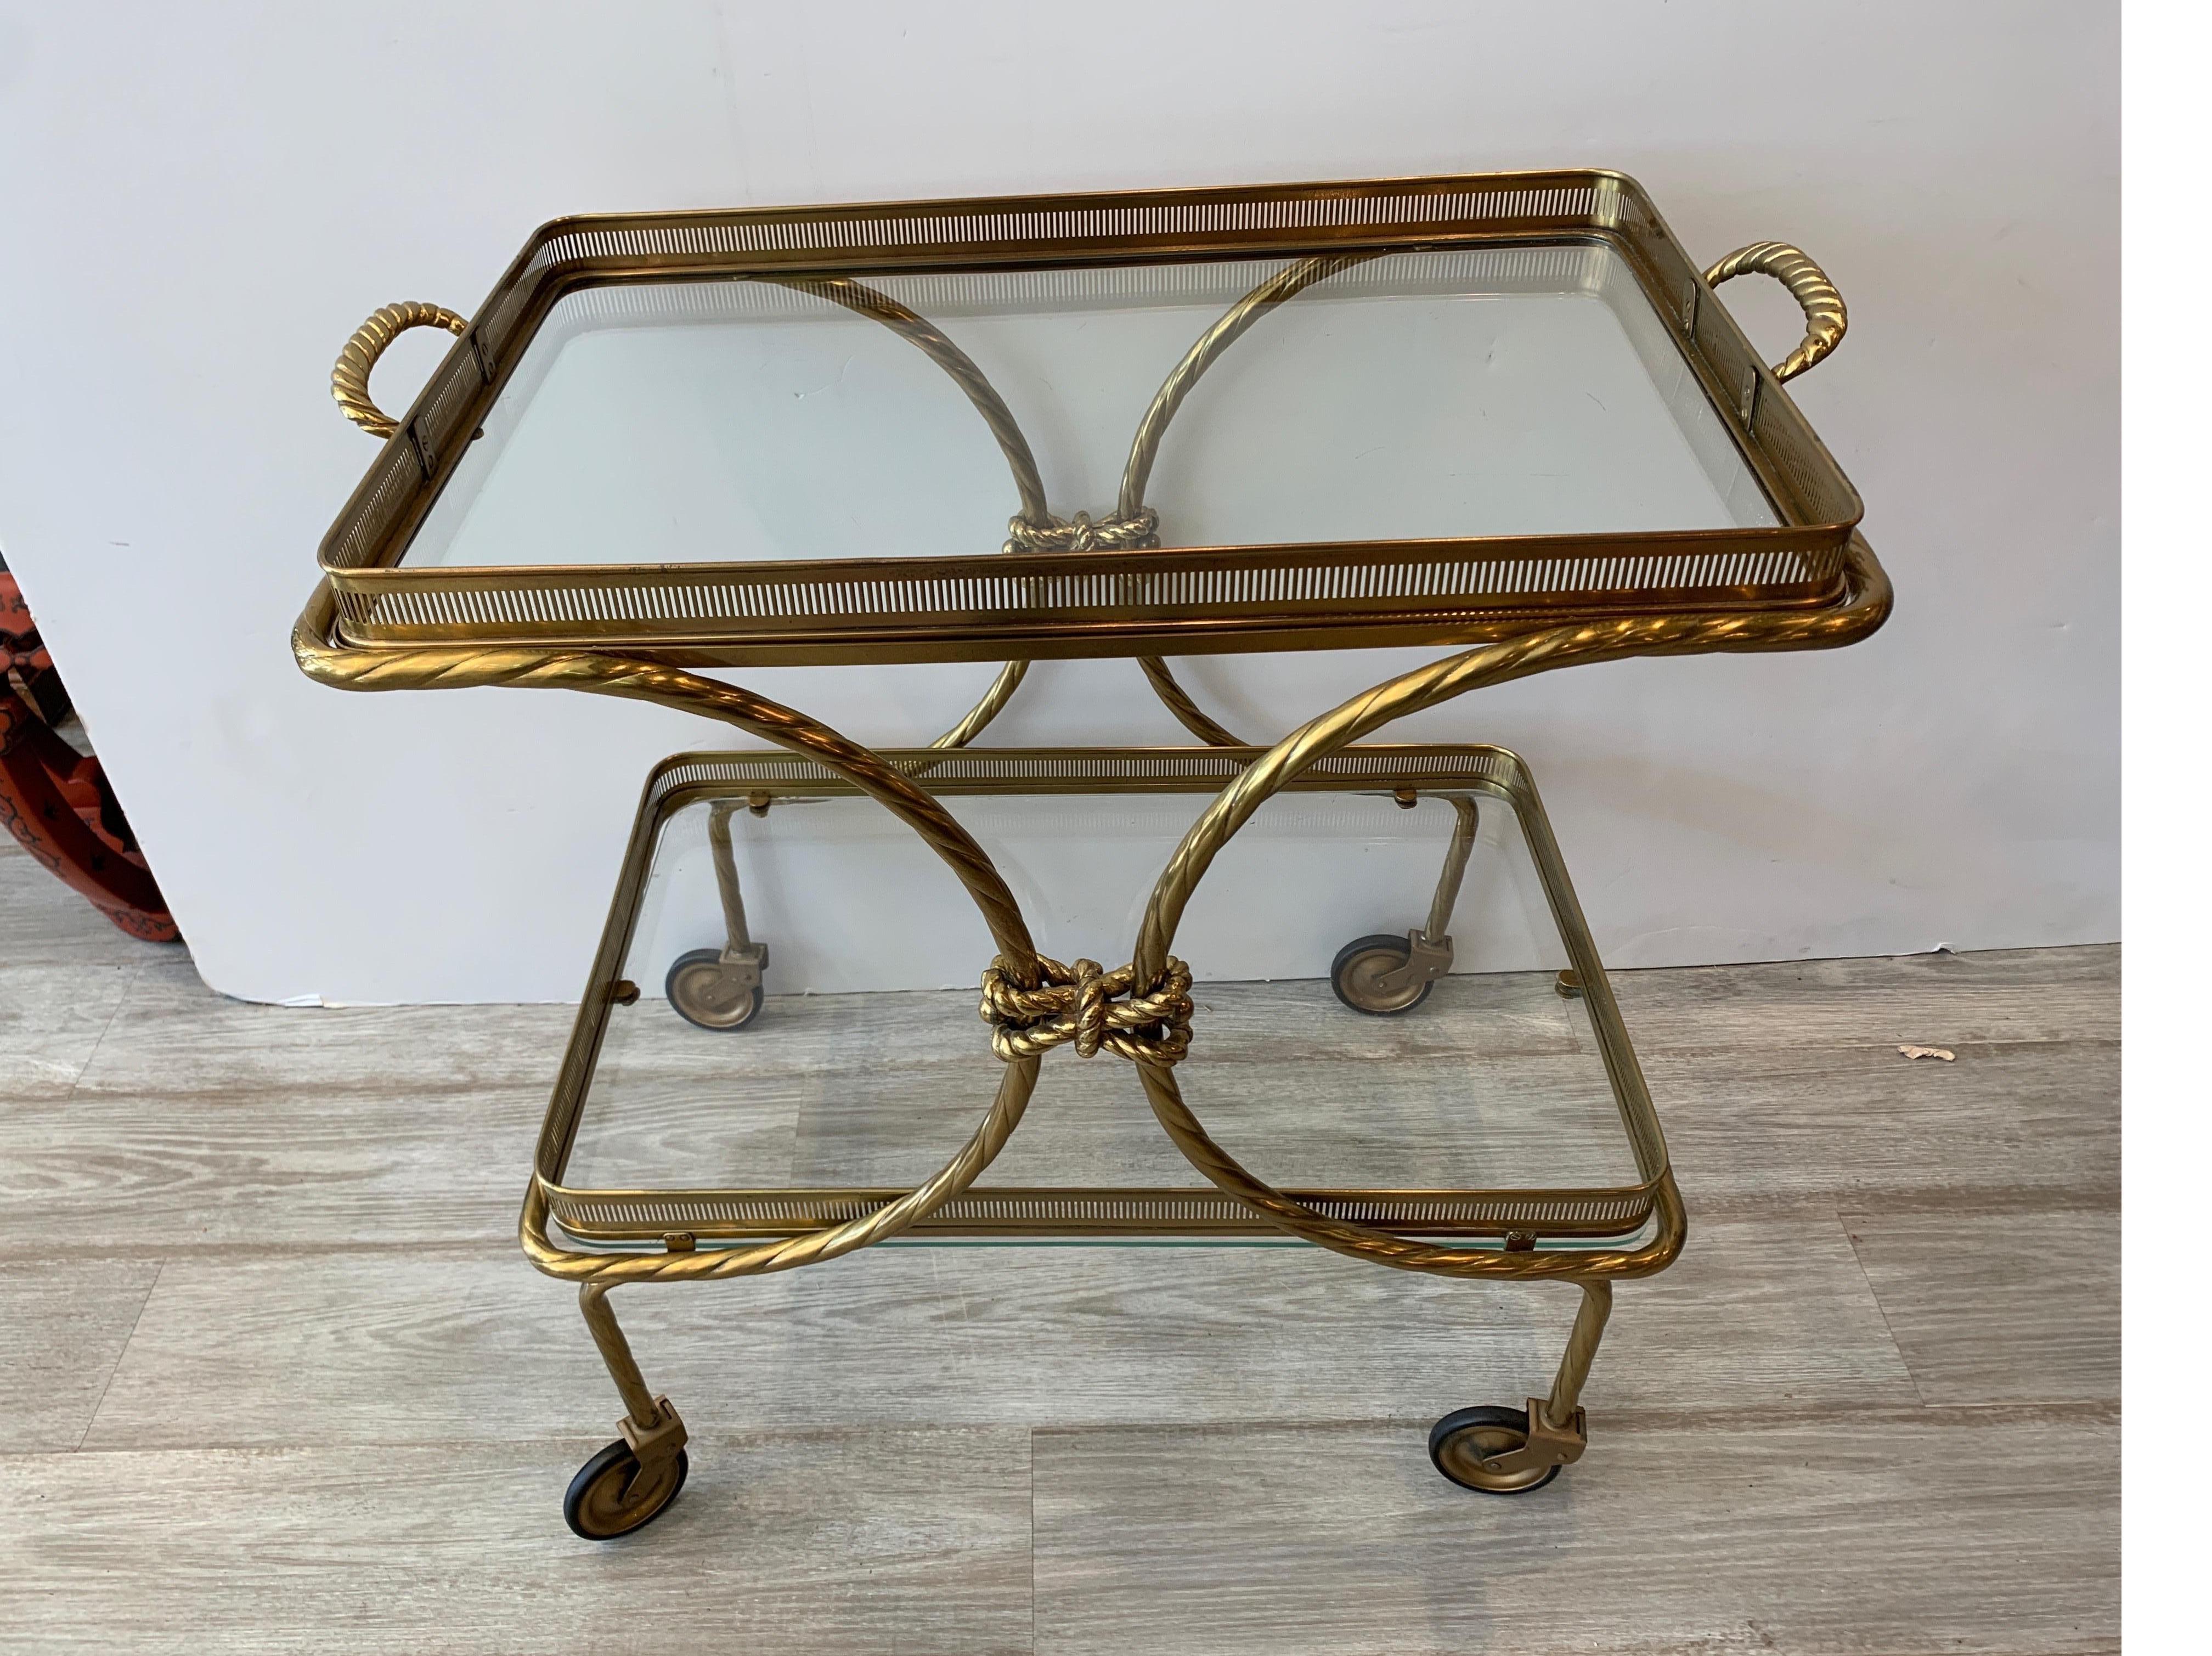 Midcentury brass tea cart with removable top tray with twist tassel design
Nice top tray that comes off to carry beverages to the table or guests
Dimensions: 27.25 H x 27' W x 17' D.